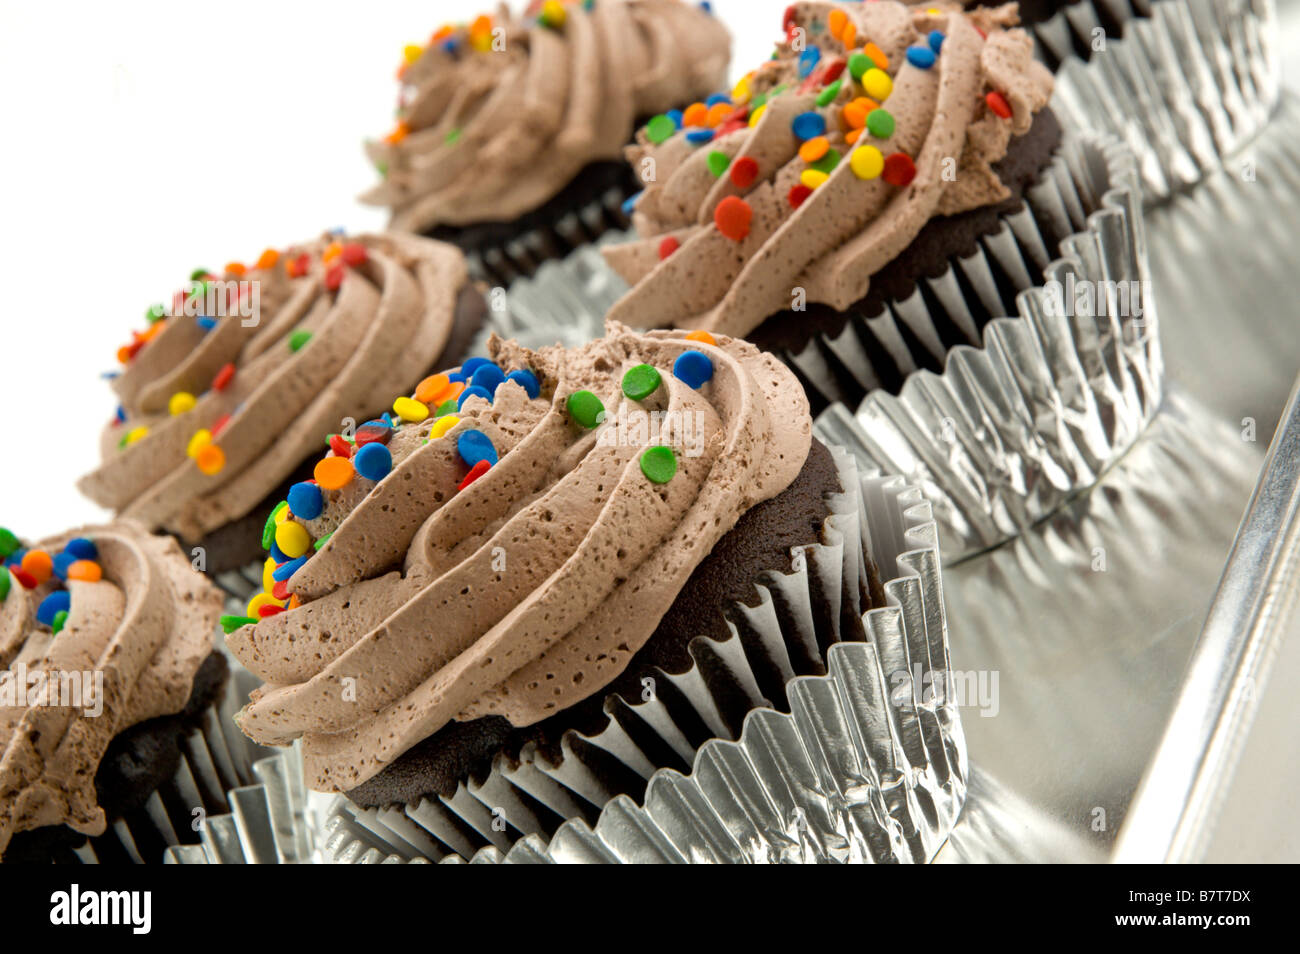 Fresh chocolate cupcakes from the bakery Stock Photo